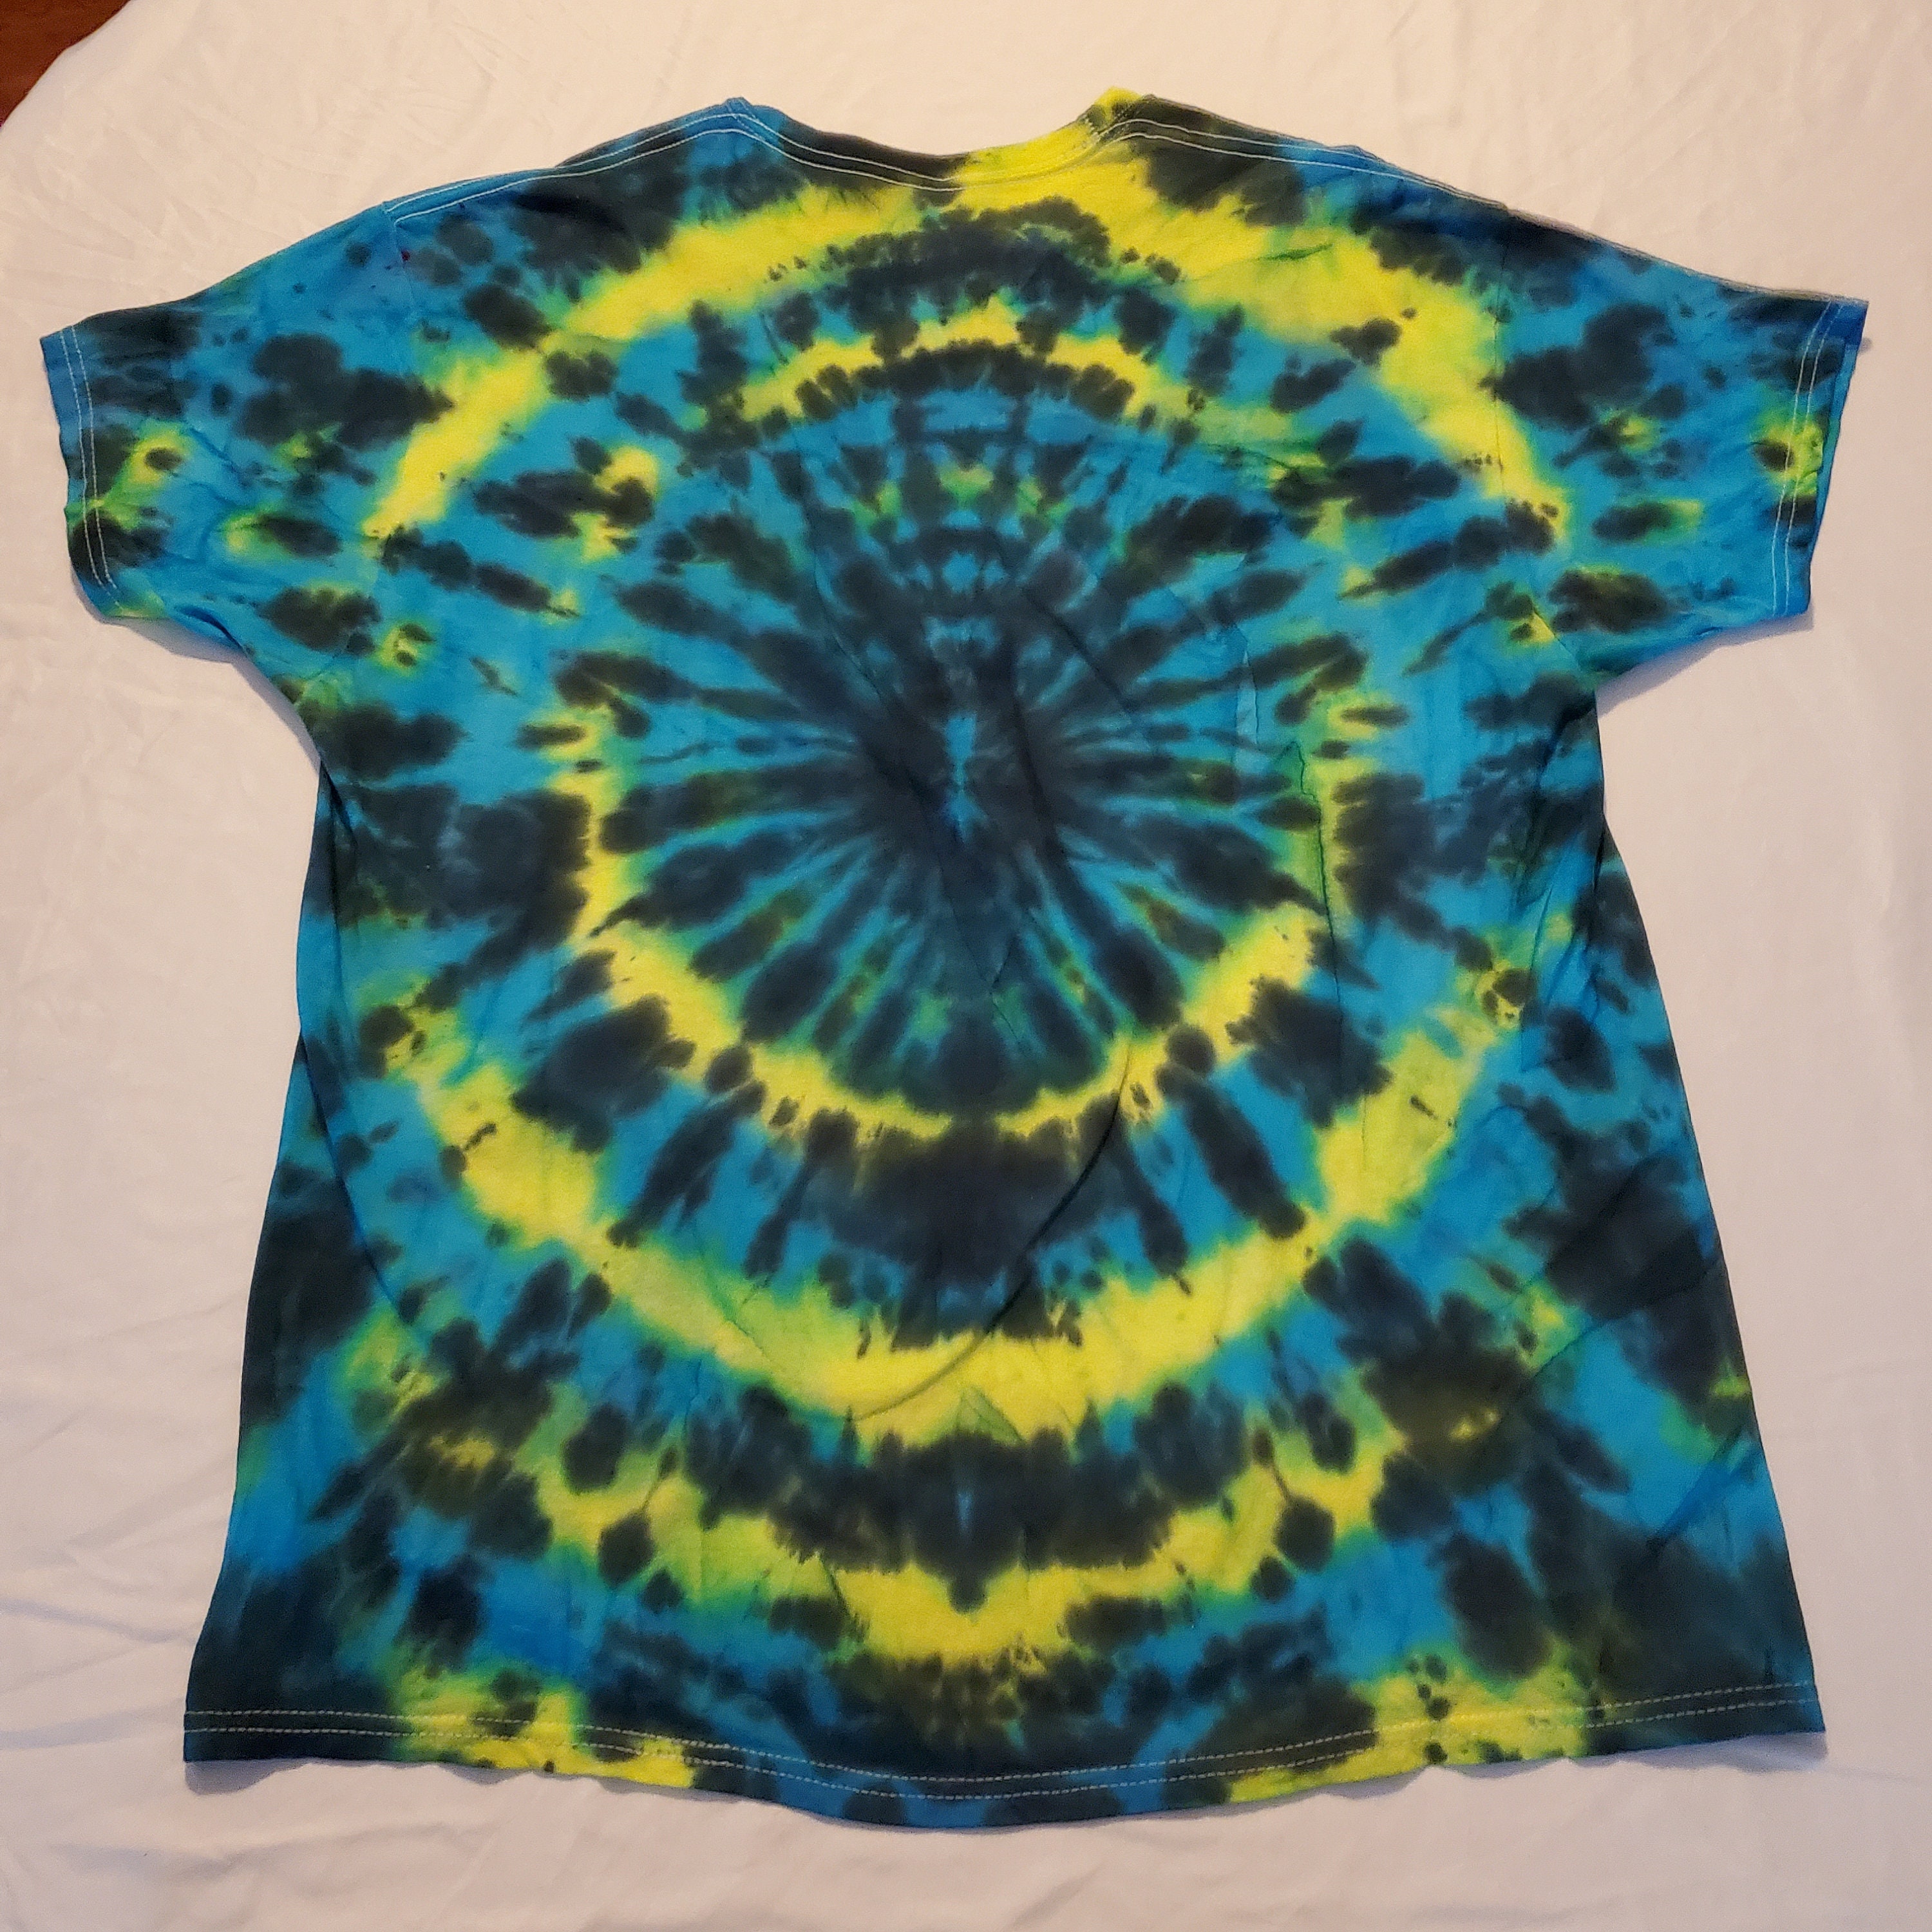 Tie Dye Tshirt. Turquoise Yellow and Black. Size XL. Item | Etsy